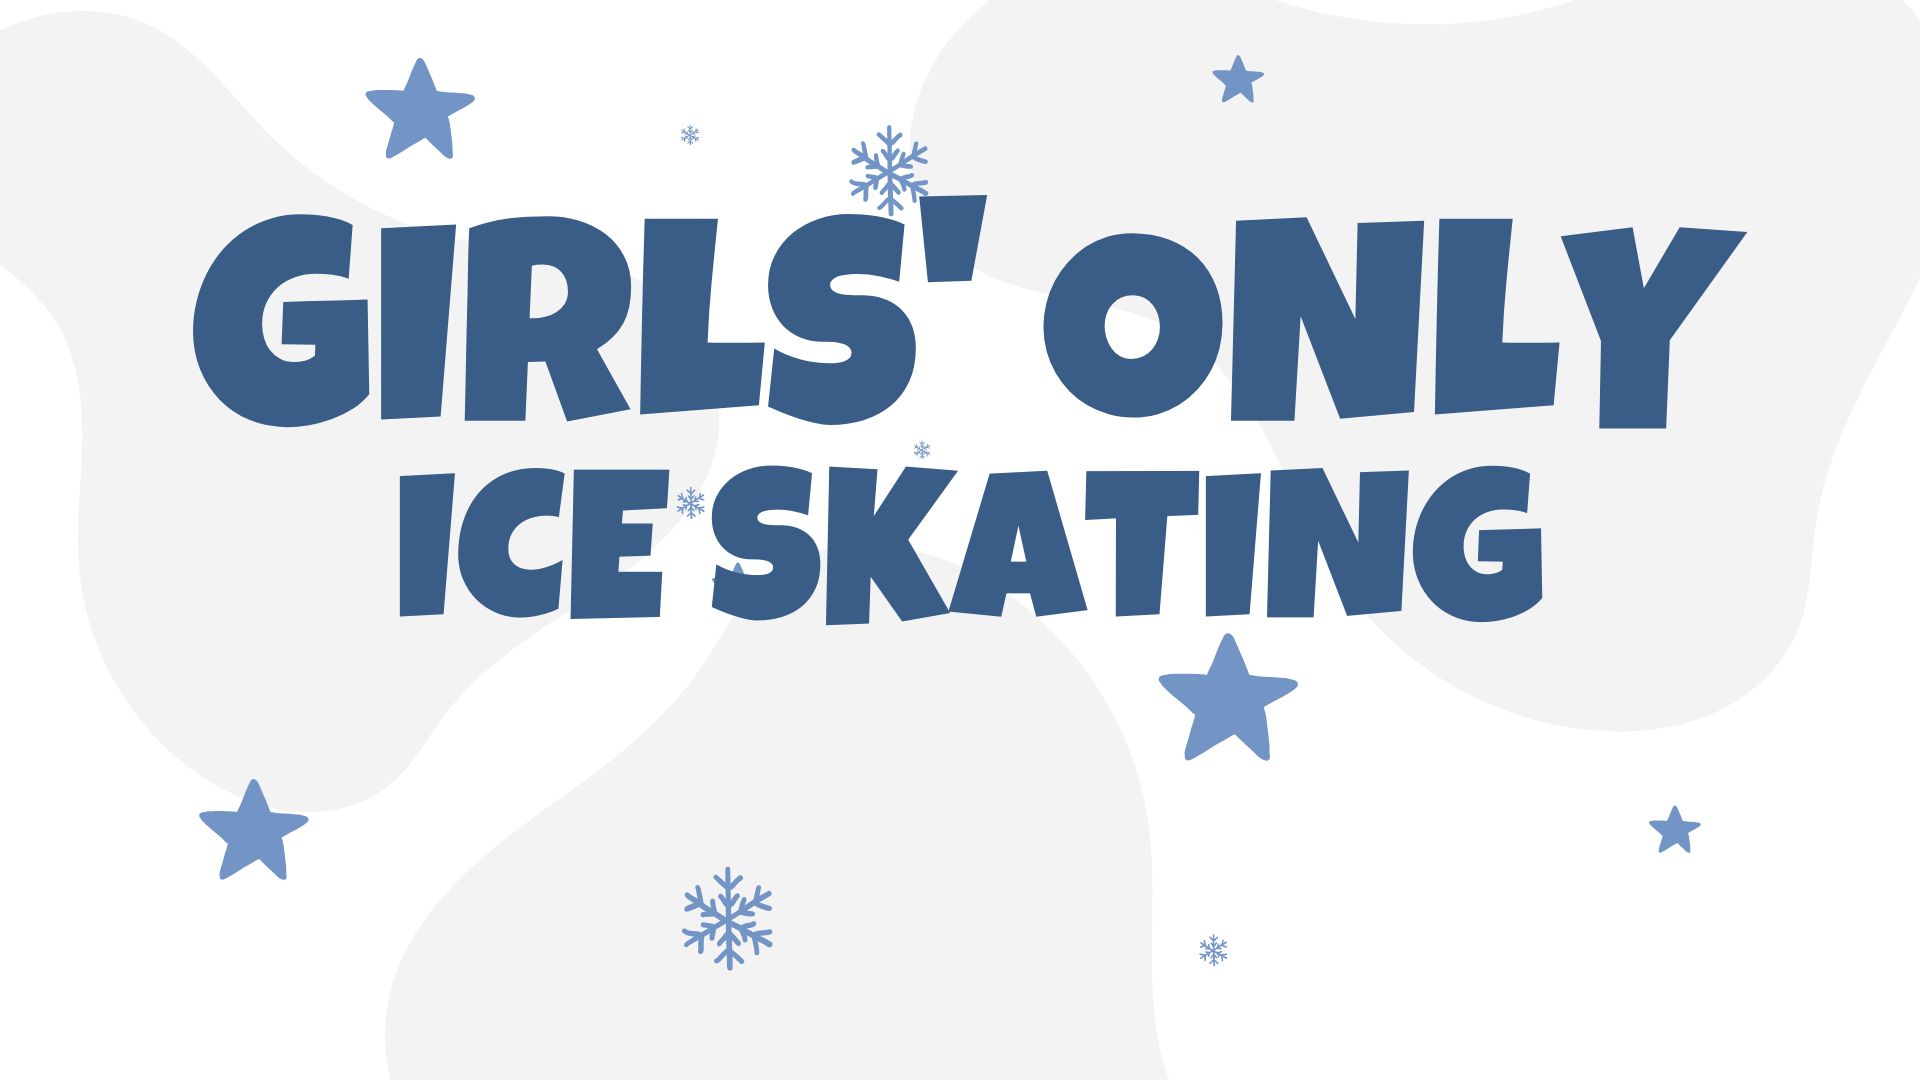 Ice skating for girls and ladies only